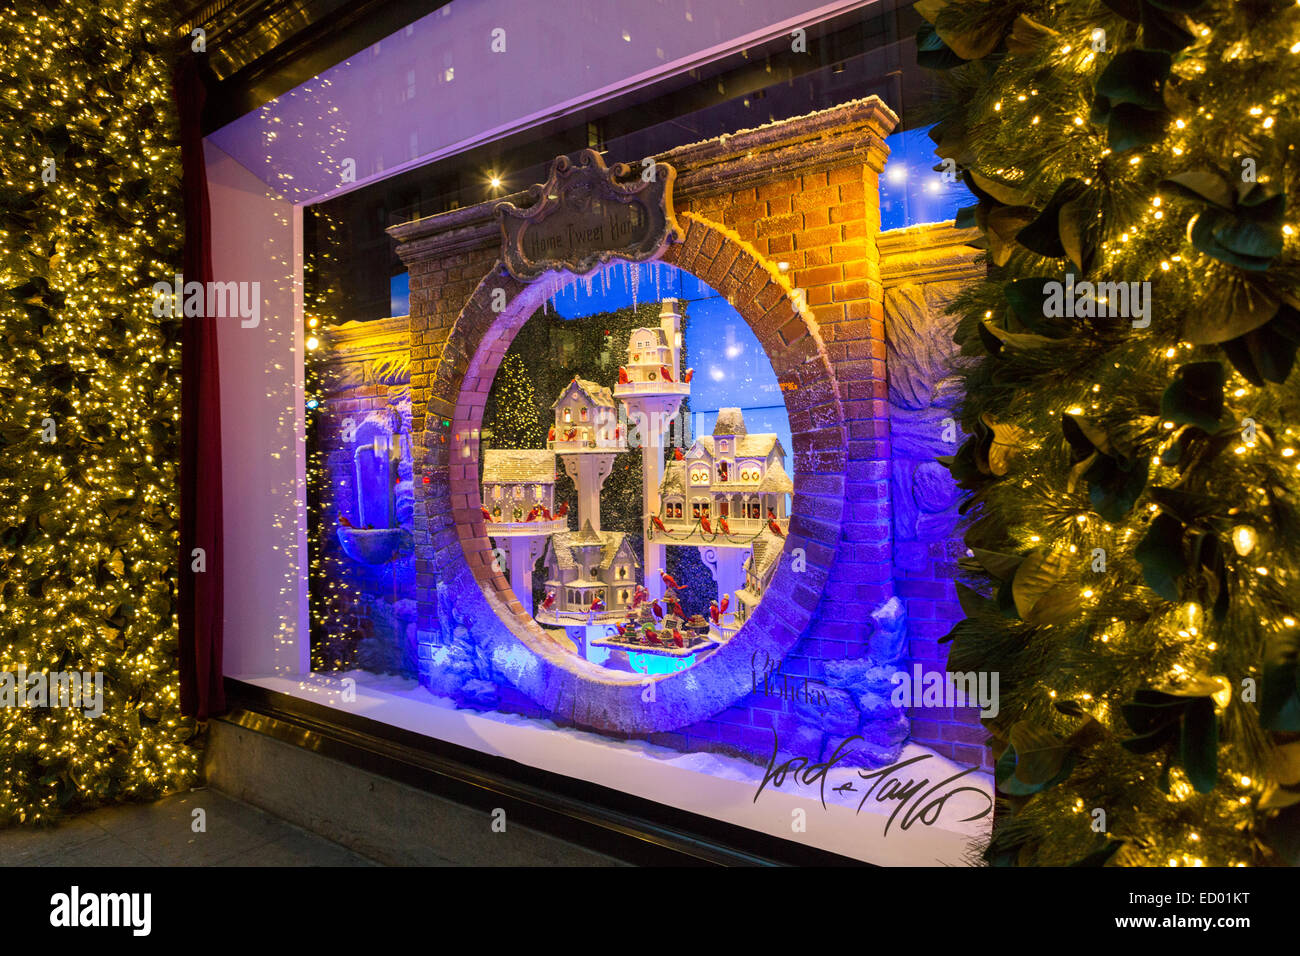 Christmas window holiday display at Lord & Taylor department store December 16, 2014 in New York City, NY. Stock Photo